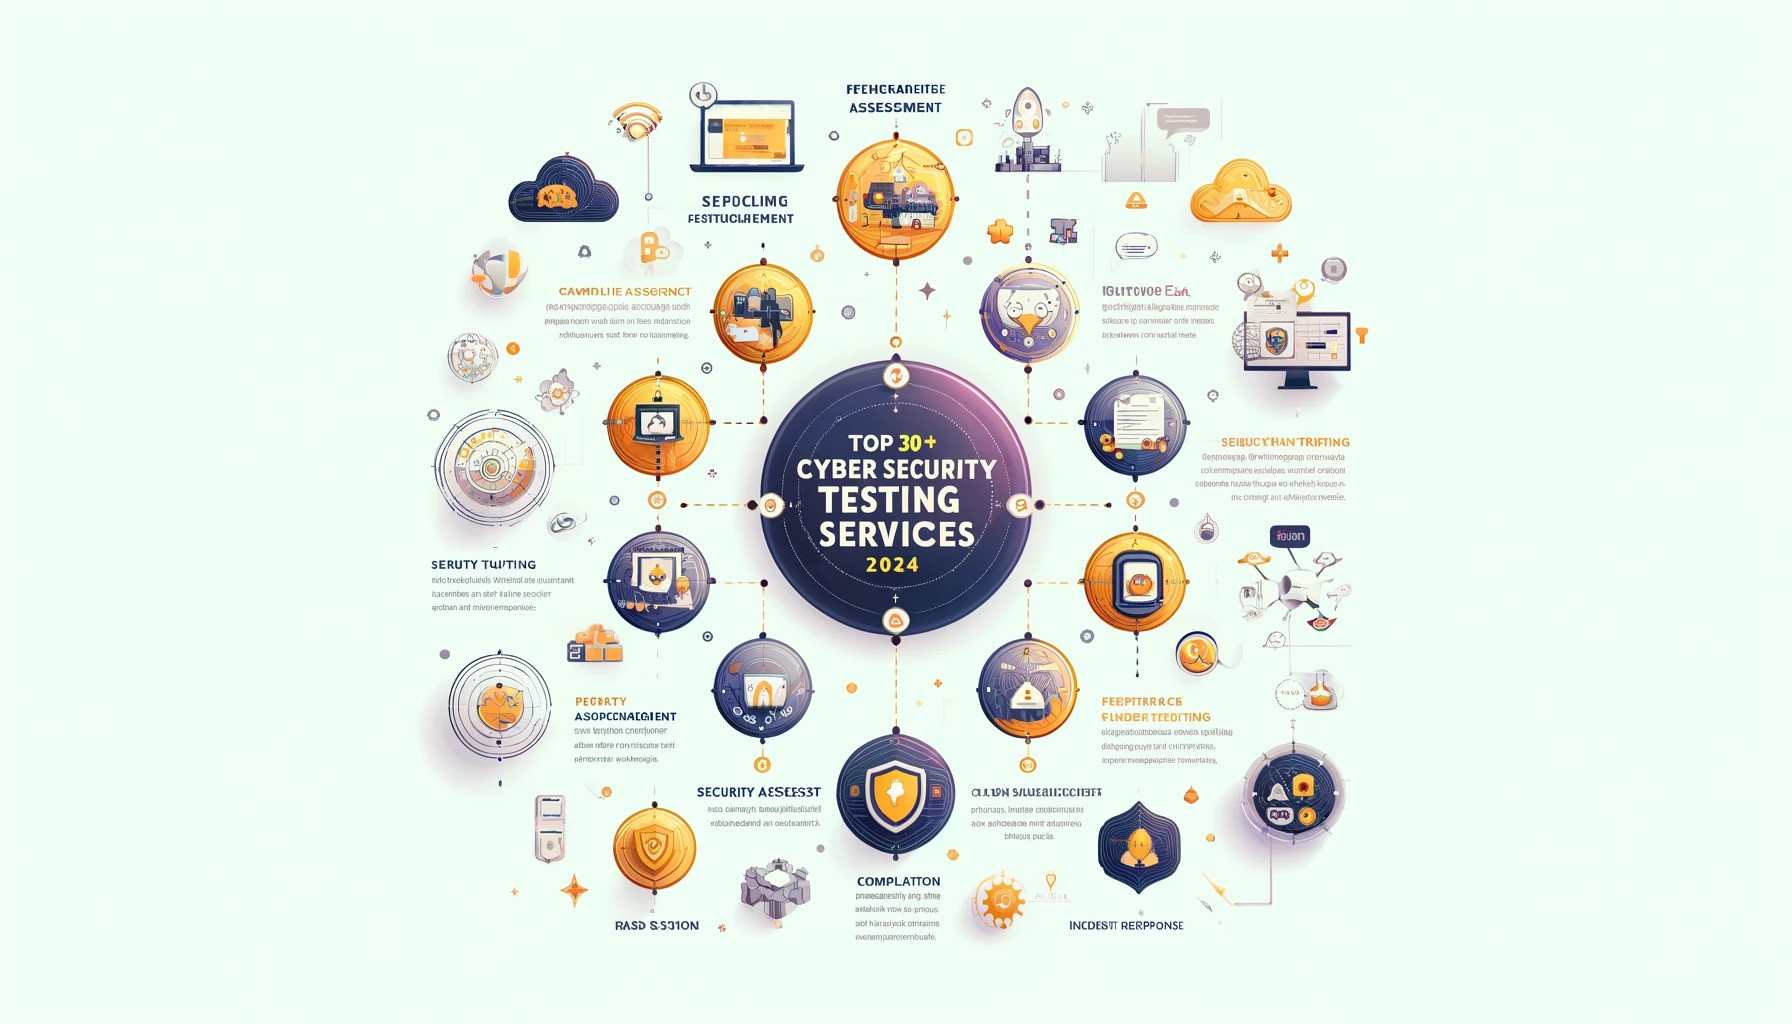 Top 30+ Cyber Security Testing Services in 2024